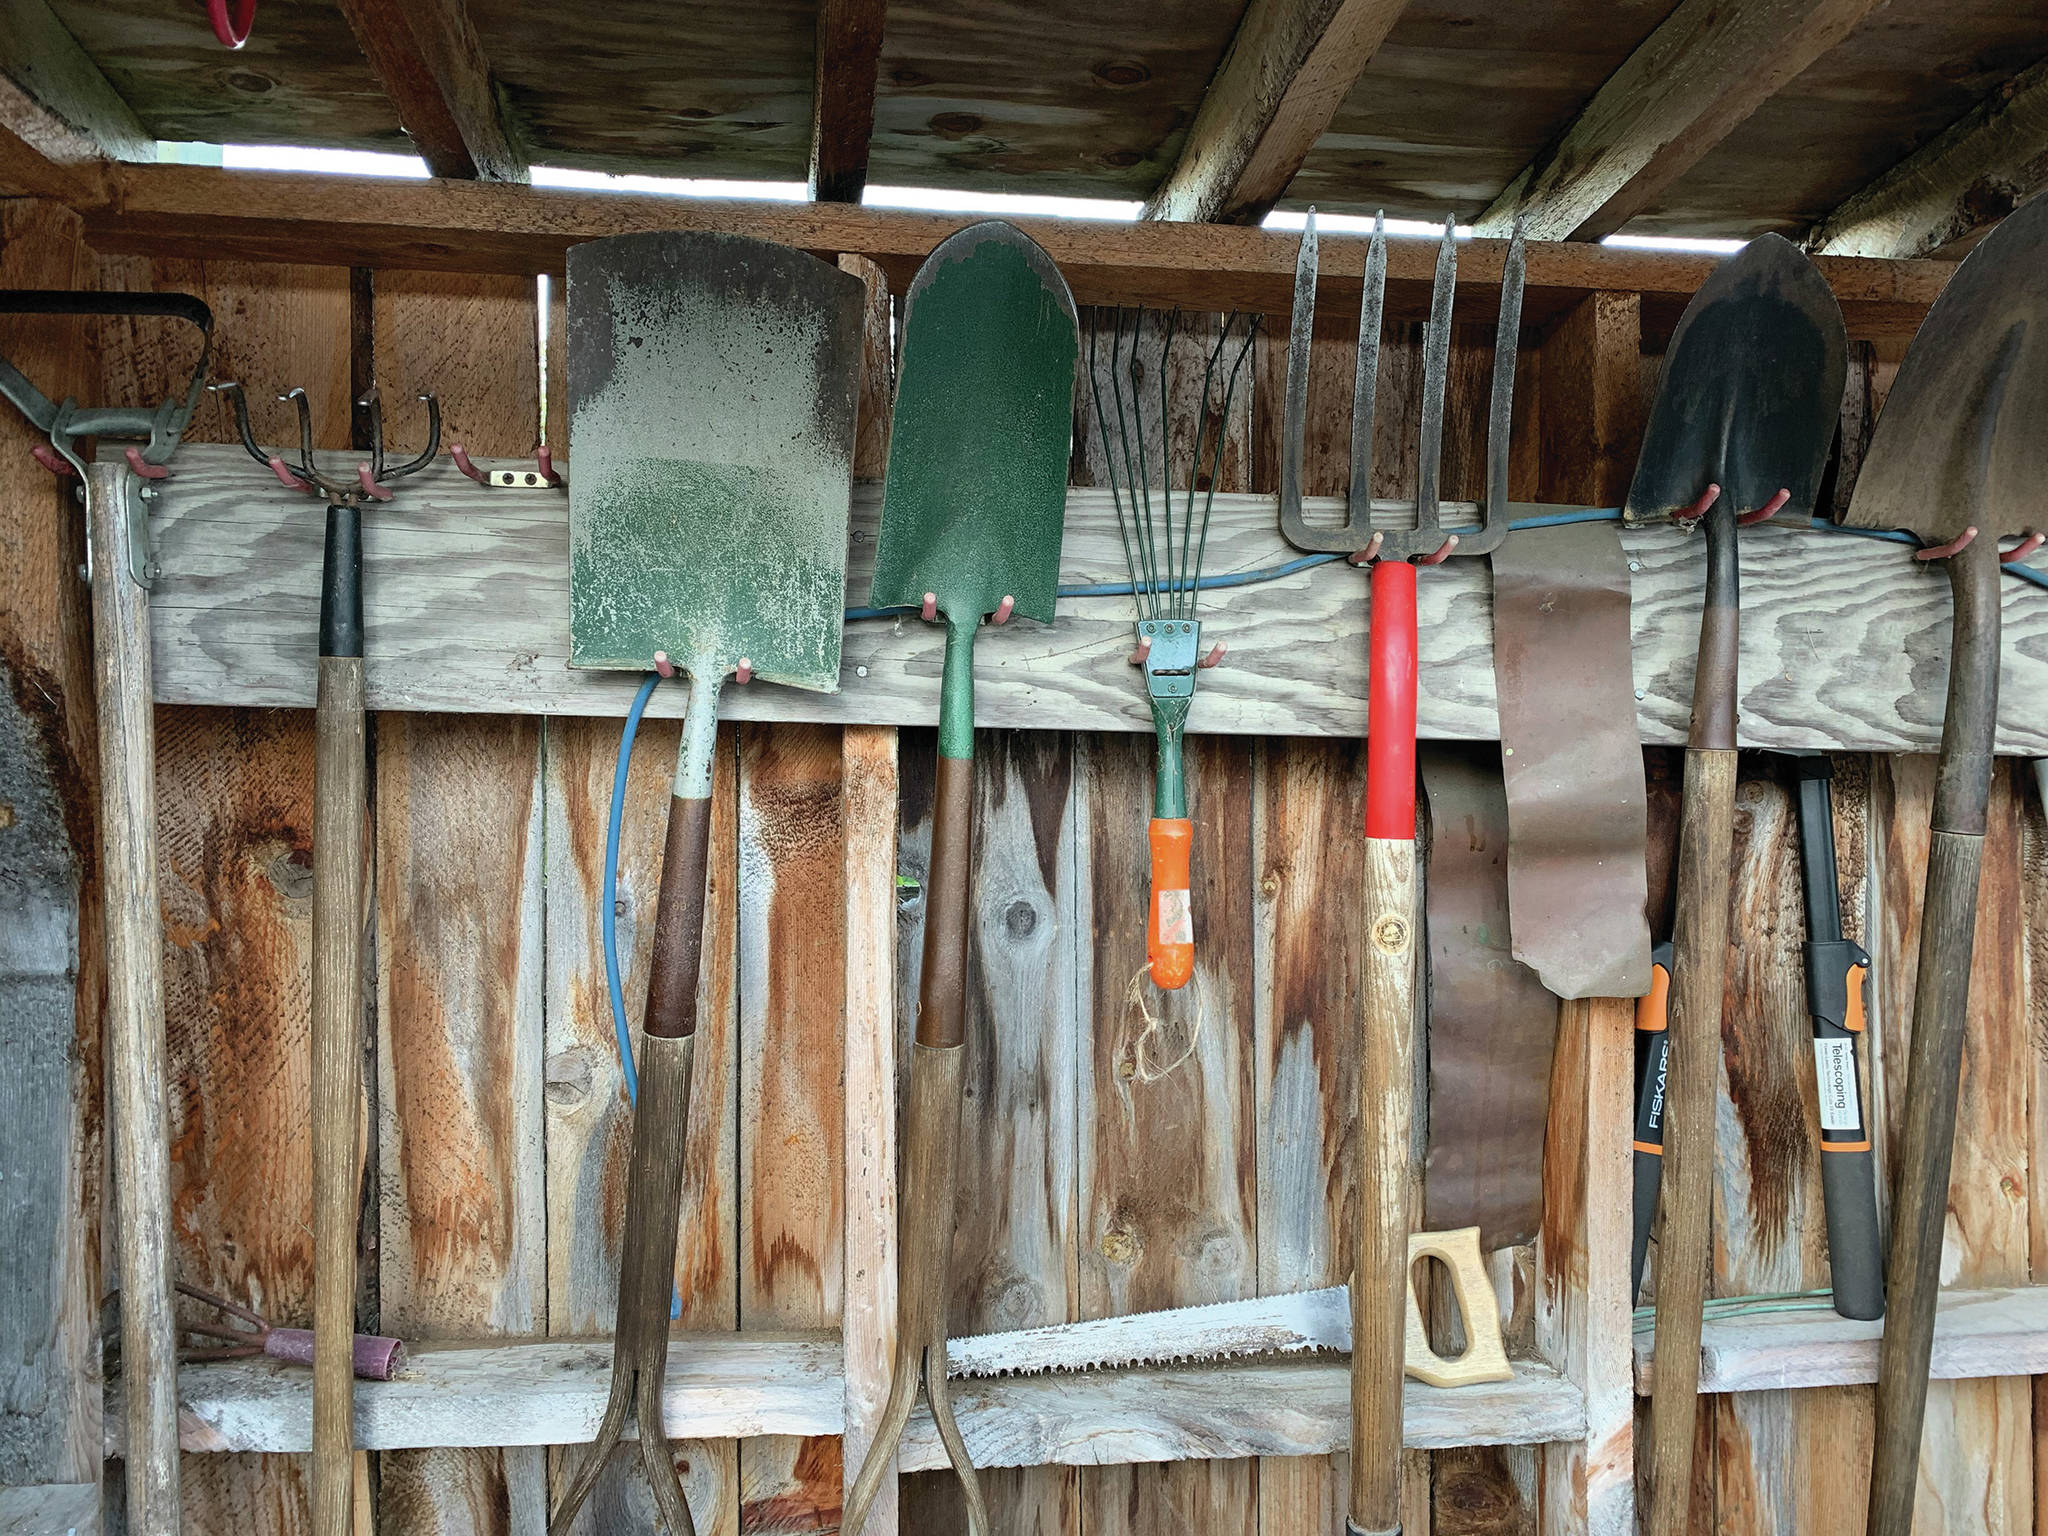 Now is that time to clean and sharpen garden tools to get them ready for next season, as seen here on Wednesday, Oct. 21, 2020, in the Kachemak Gardener’s shed. (Photo by Rosemary Fitzpatrick)